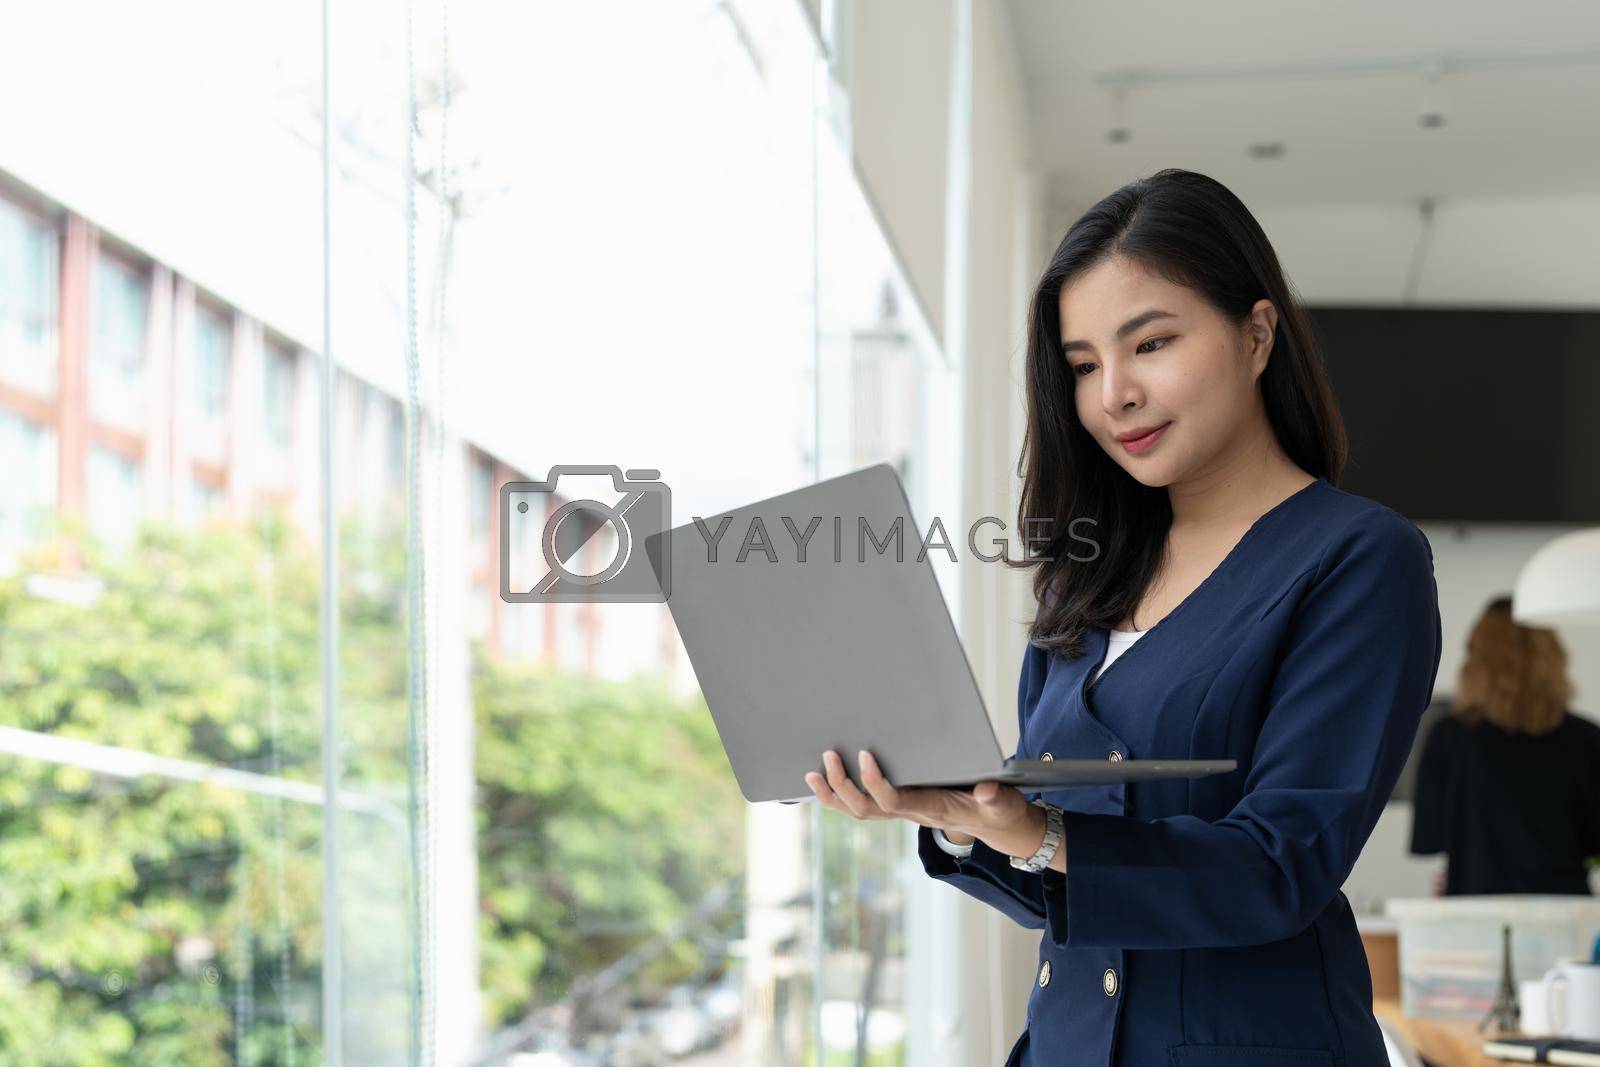 Royalty free image of Asian businesswoman standing in modern office and using laptop computer by nateemee